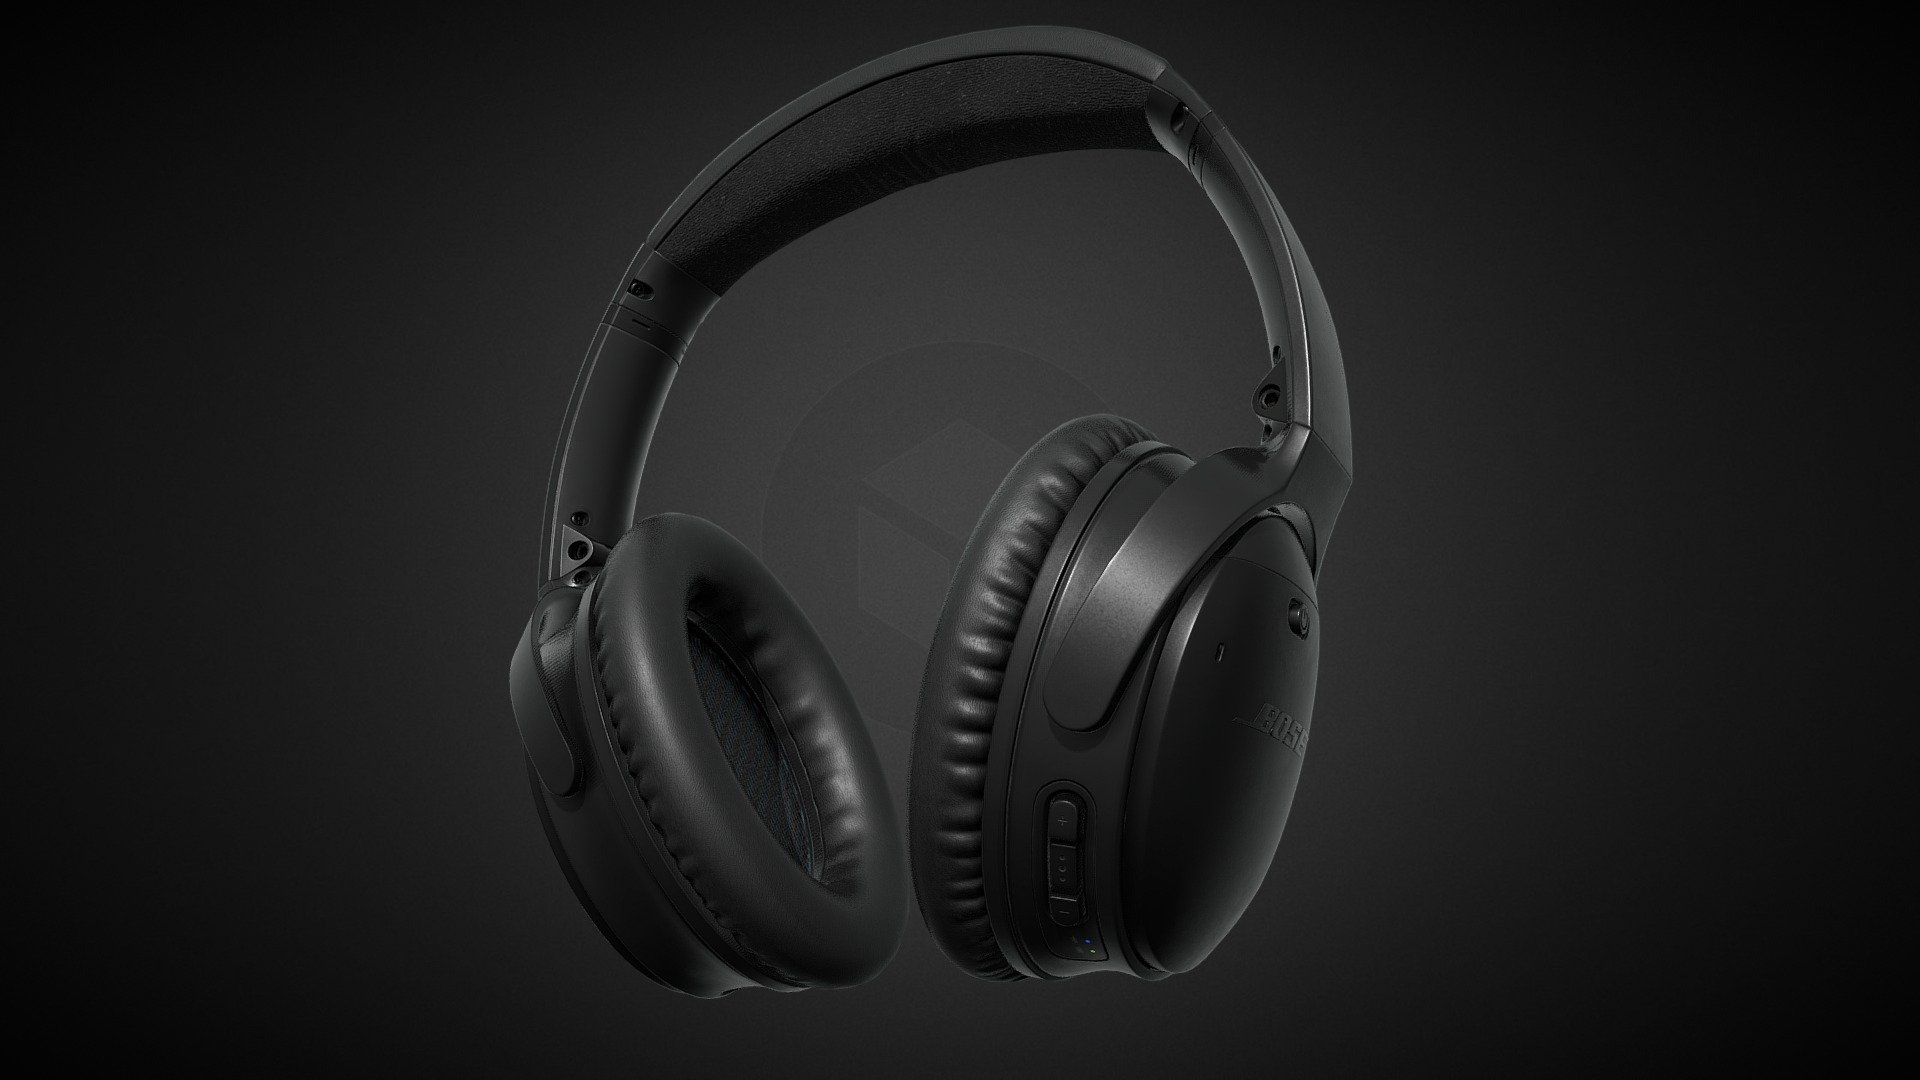 These Bose Quiet Comfort 35 are a Low to Mid poly model. Its been modelled using the video-game workflow (High poly + Low poly modeling, with baked normal map), so it is optimized to be used as an in-game asset, but at the same time, It's kept with enough topology to hold good definition for close-up renders. 

1x material set with 4k PBR Metalic/Roughness textures. The model has mirrored UV's to increase Textel density and texture definition.

Baked maps are included in case you want to try out your own textures. 
This model was also done in a way that most moving parts can be animated. Pivots are all in place and oriented in correct positions. 
I can provide other file formats if needed.

Check out more renders here: https://www.artstation.com/artwork/dKJKB3

Social and Contact:

Artstation: https://www.artstation.com/brunogf13 - Bose Quiet Comfort 35 - Buy Royalty Free 3D model by artbyBruno (@Bruno.Fonseca1) 3d model